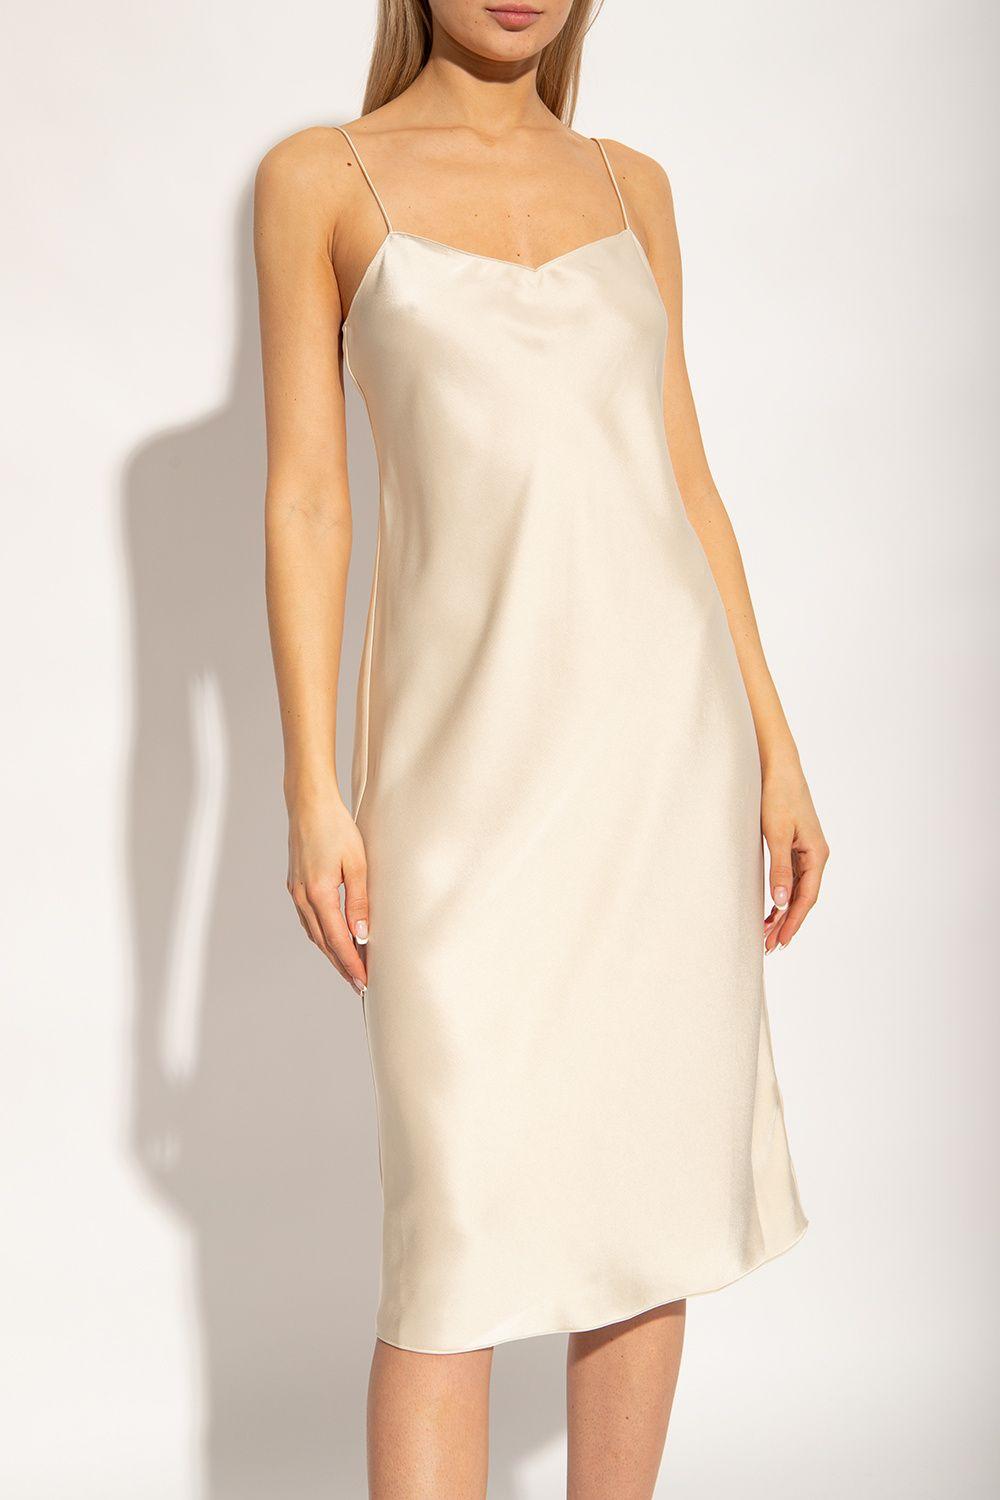 Theory Slip Dress in Natural | Lyst